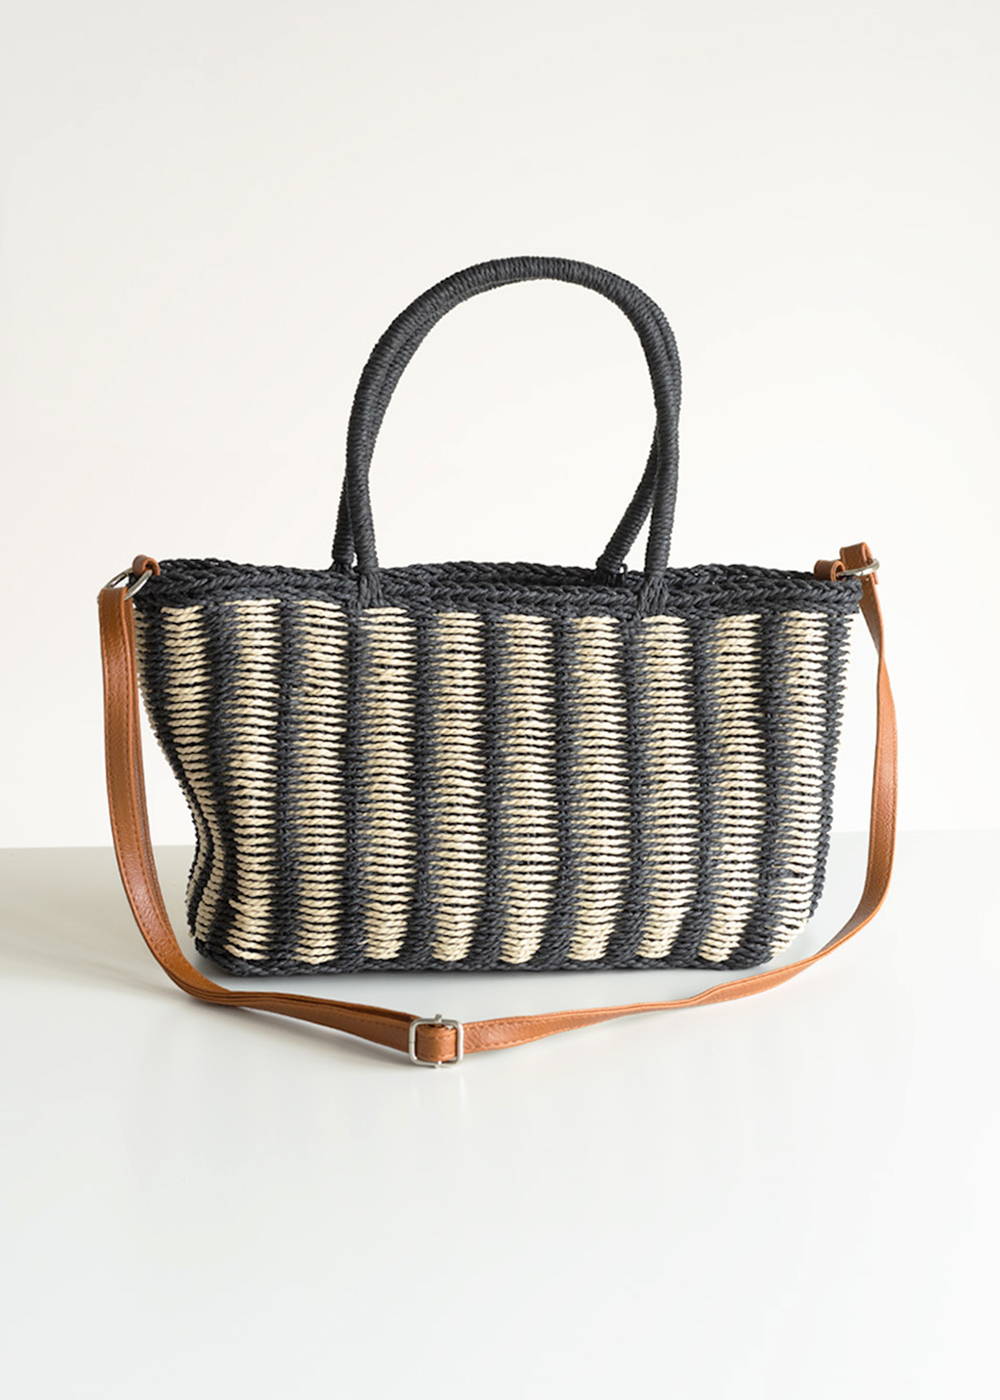 A black and white striped wicker basket with a brown shoulder strap